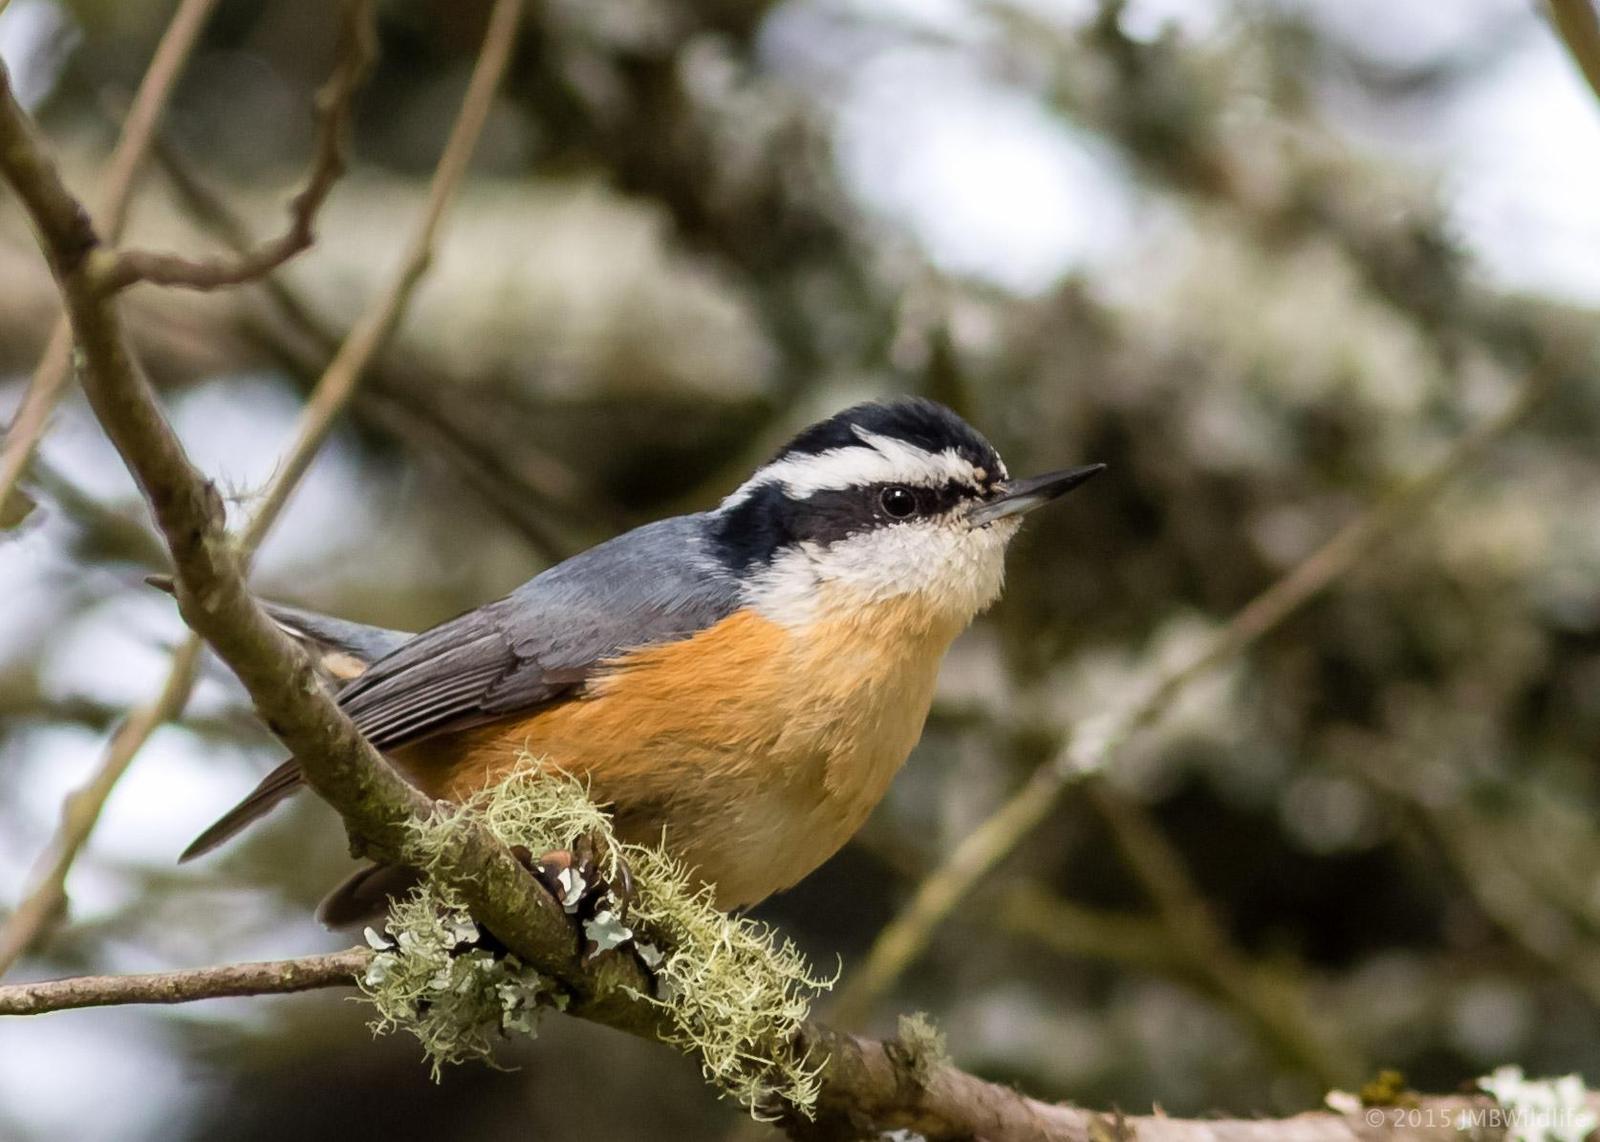 Red-breasted Nuthatch Photo by Jeff Bray